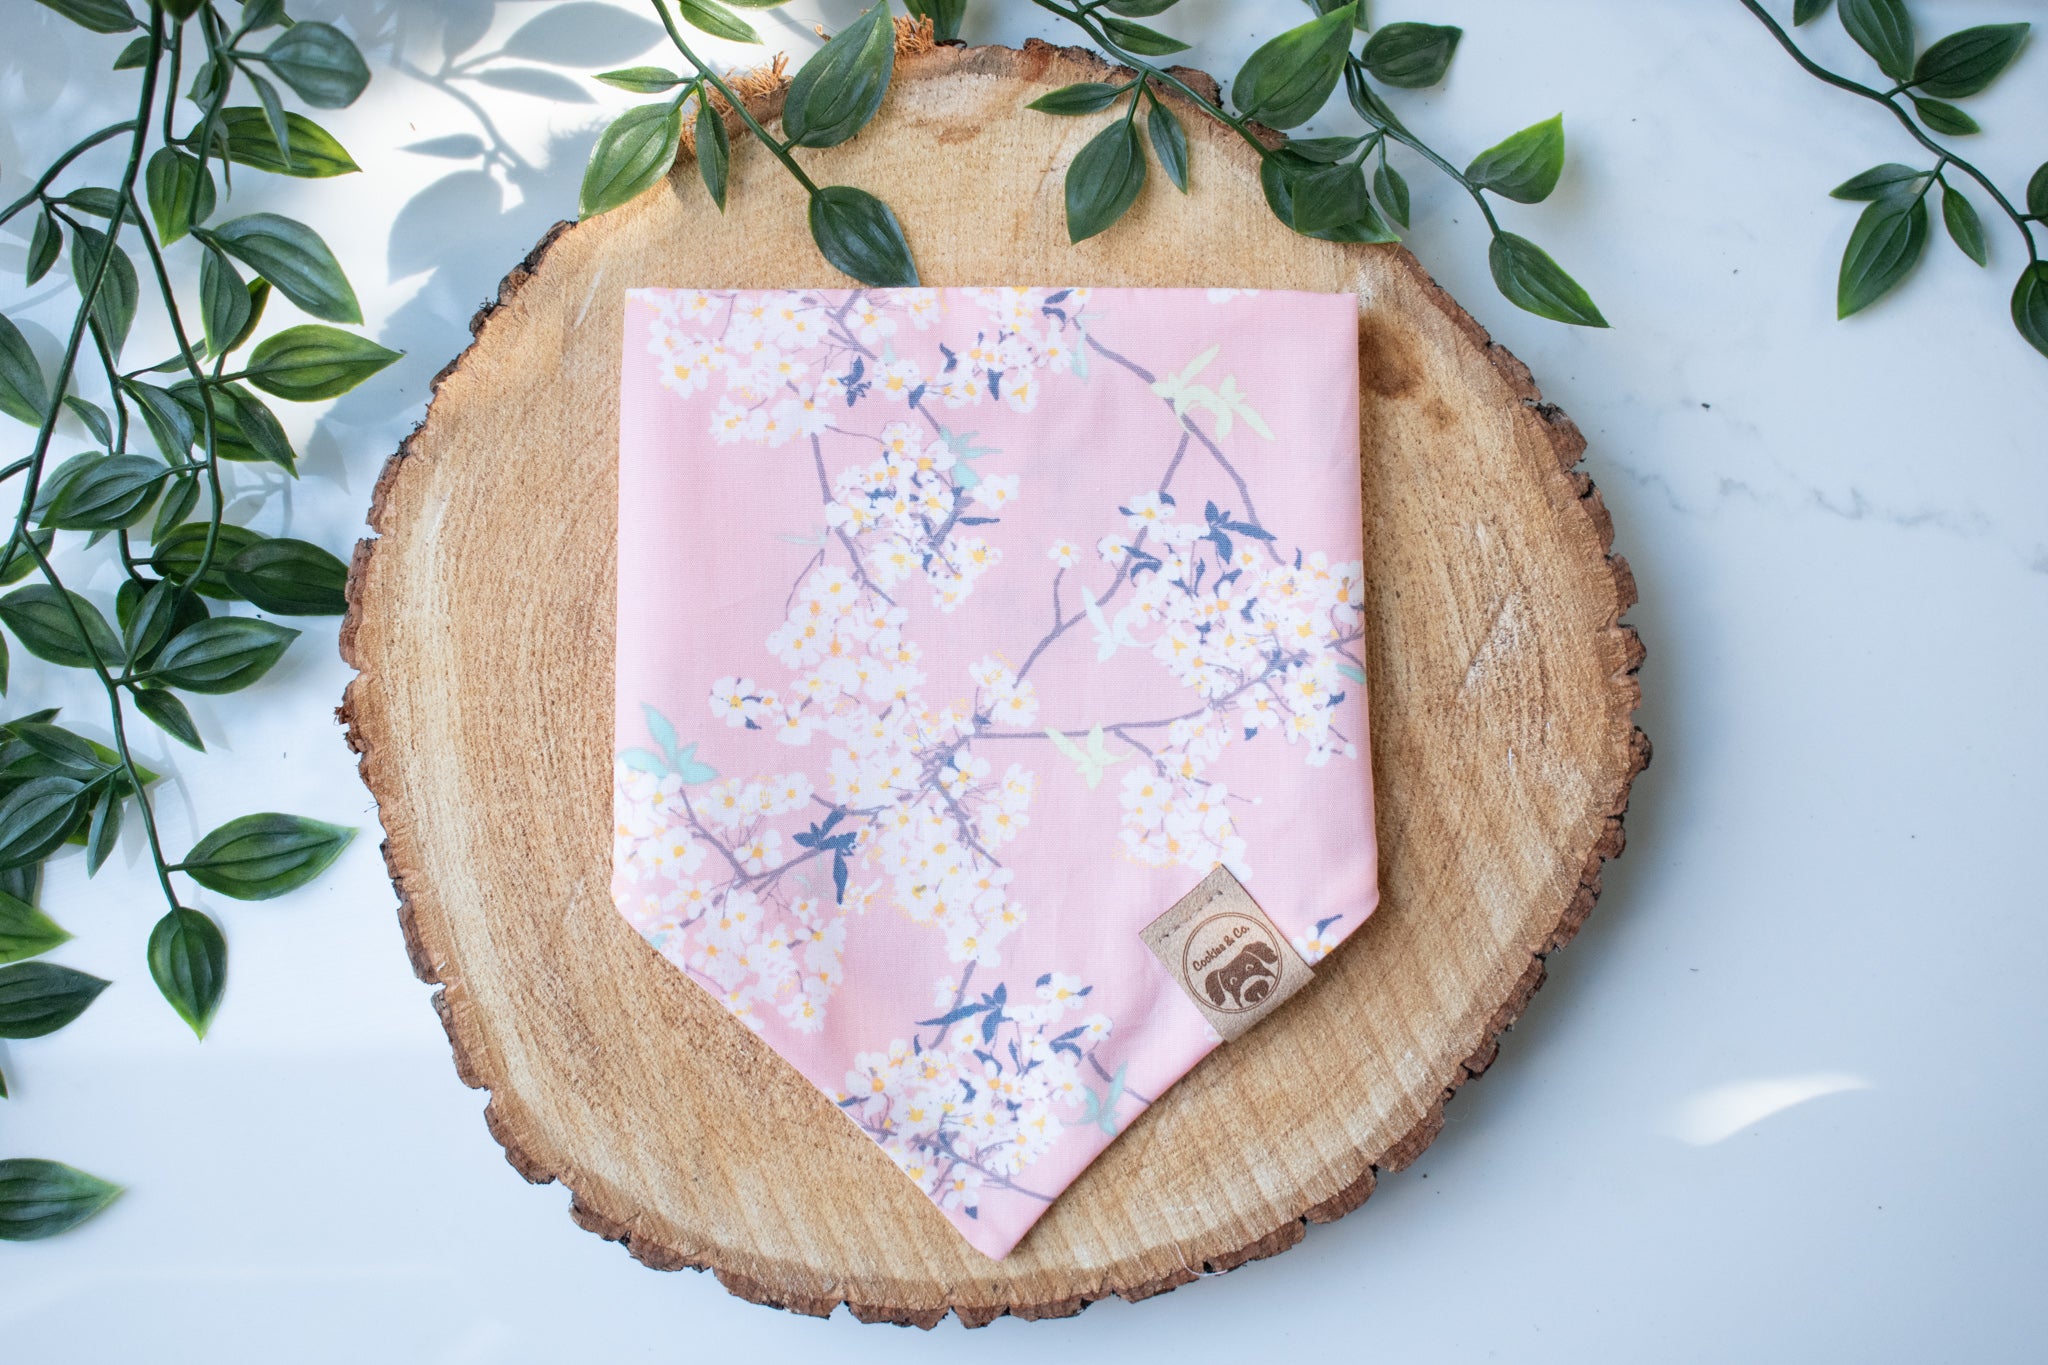 Cherry Blossom - Dog Bandana Tie-On with Snap Buttons